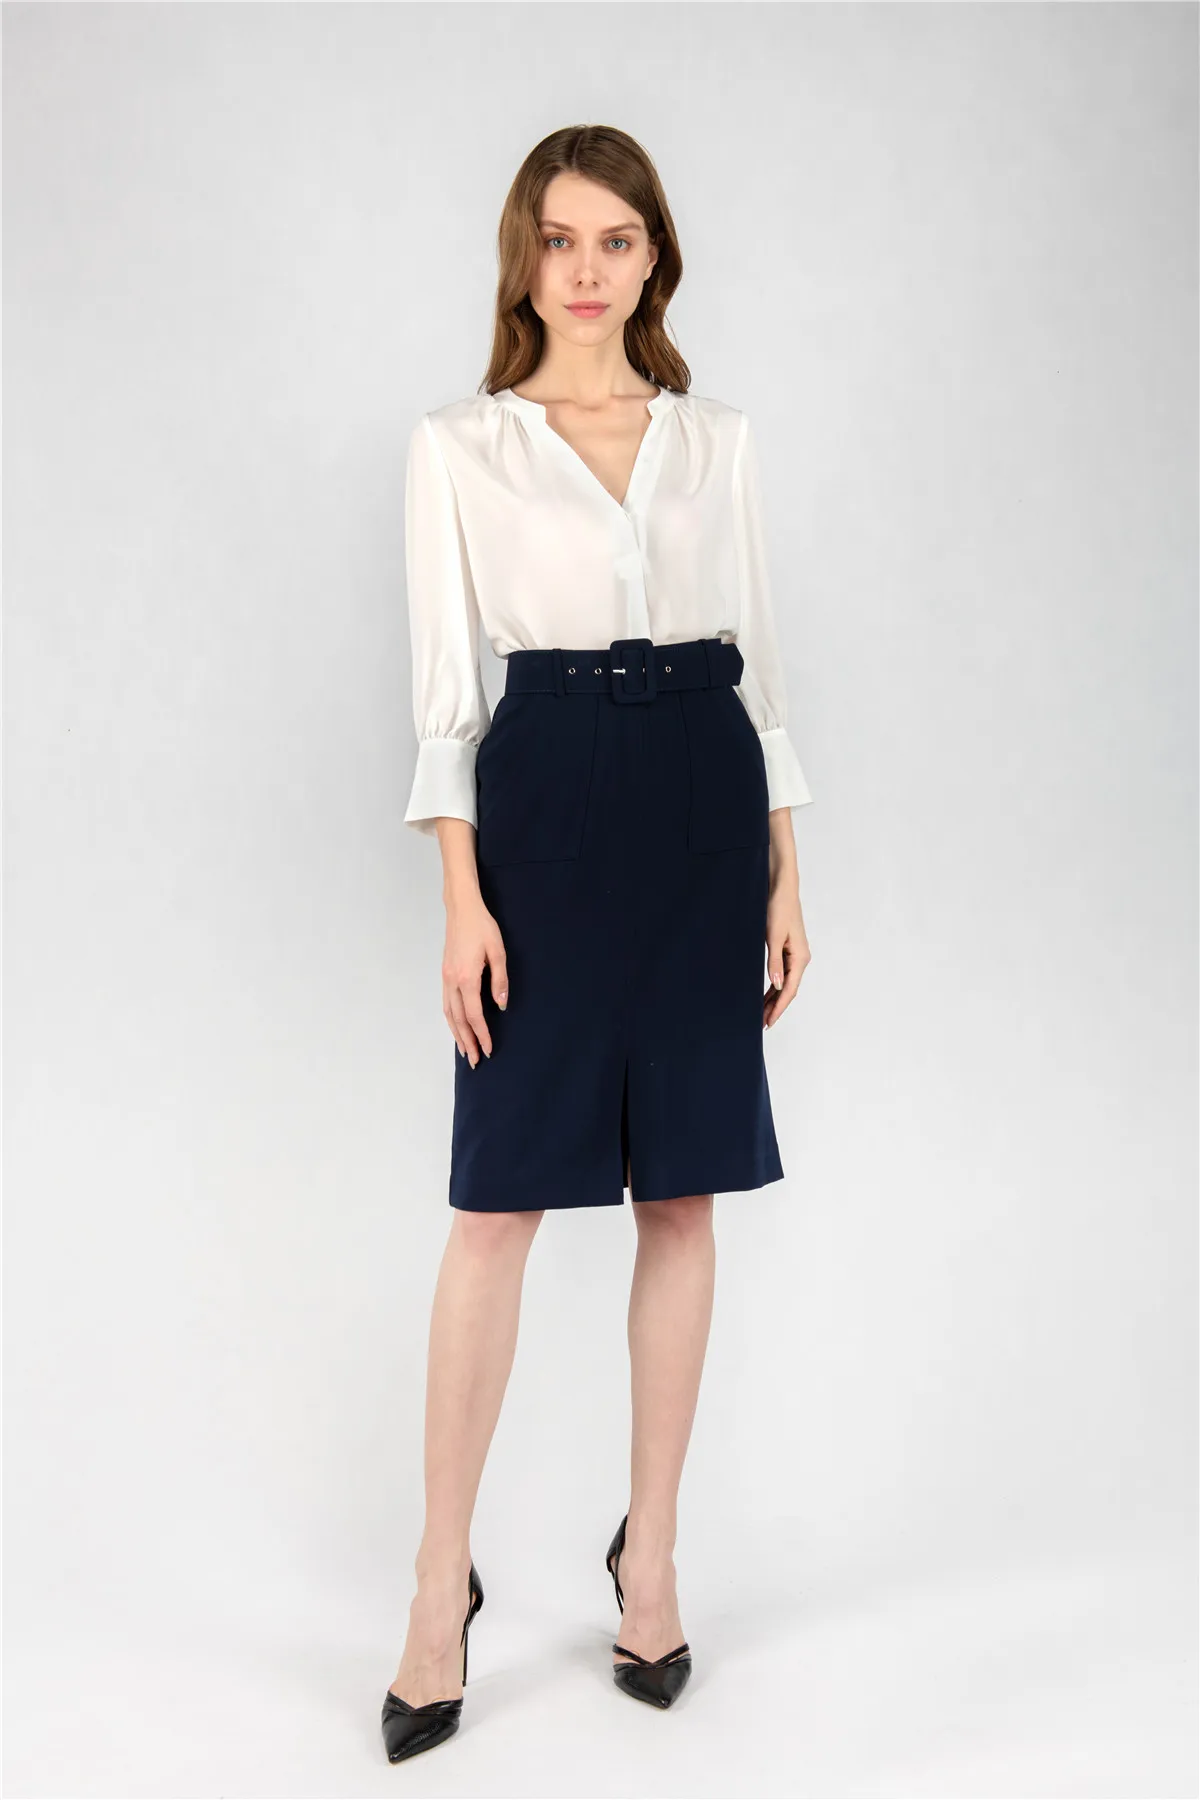 2021 Hot Selling Women Pencil Mid Length Slim Office Skirt With Belt